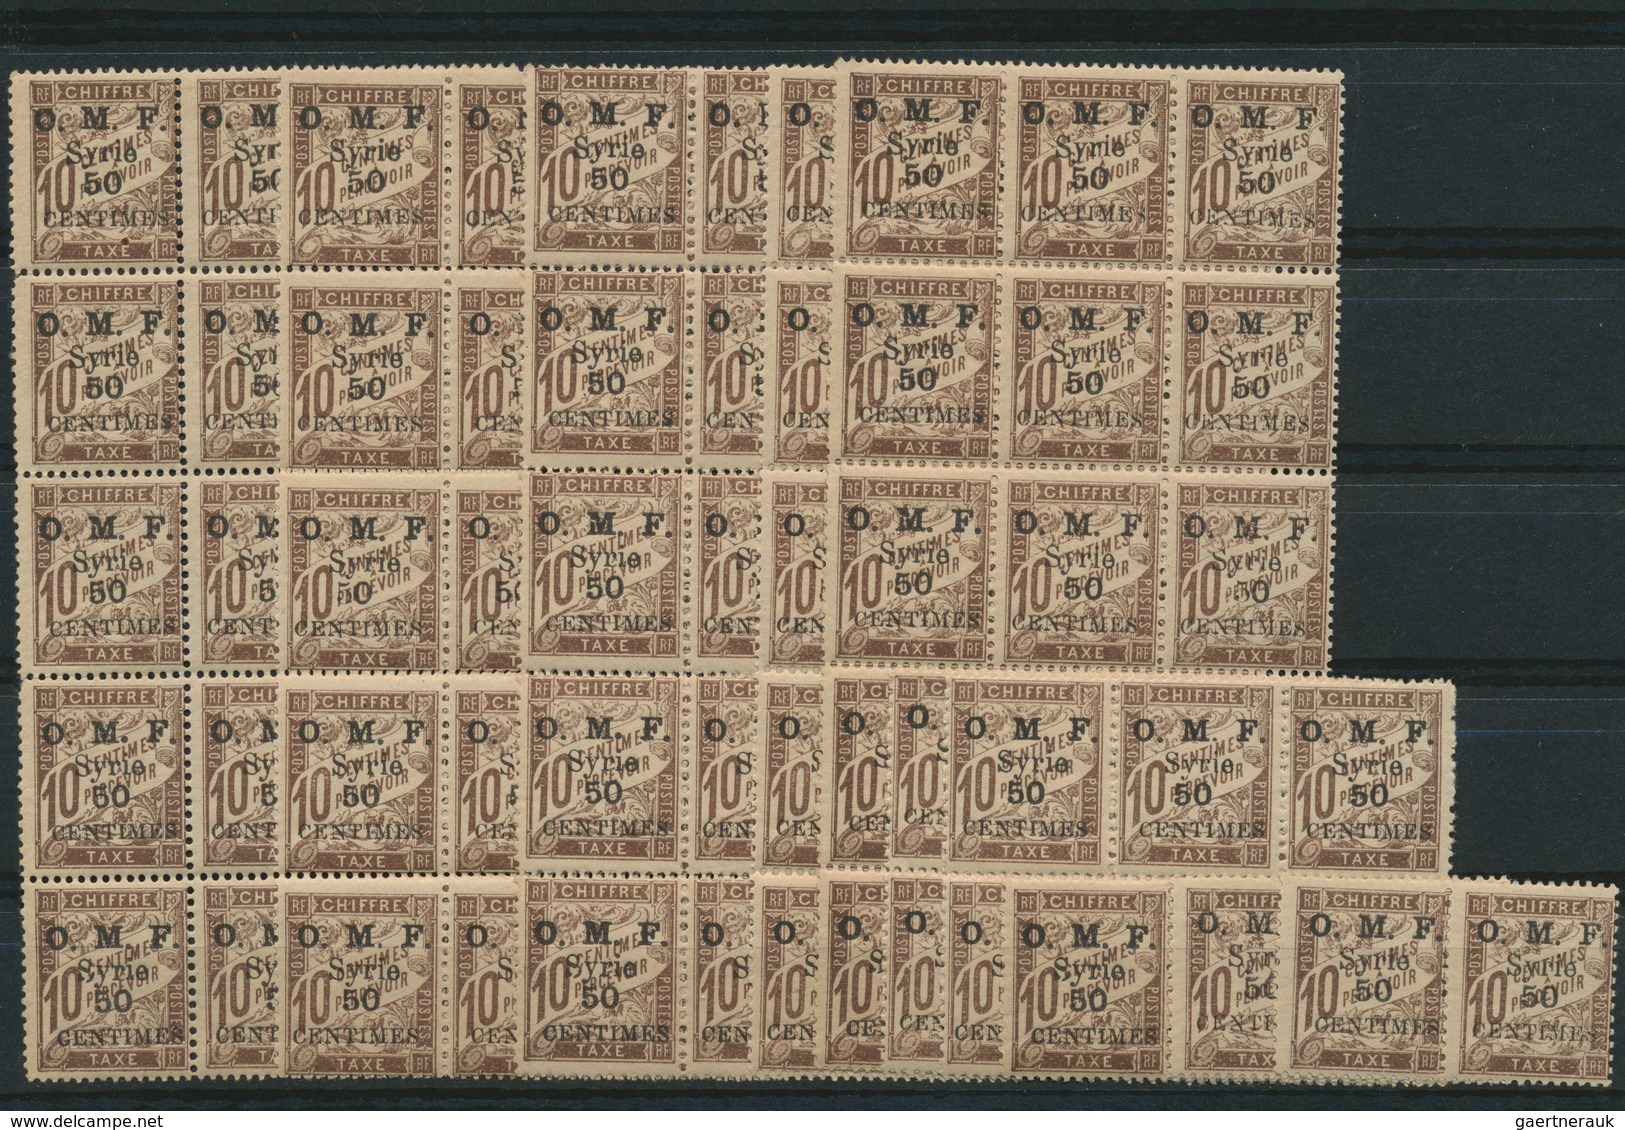 Syrien - Portomarken: 1920/1924, u/m assortment of different issues, mainly (larger) units. Maury 7.